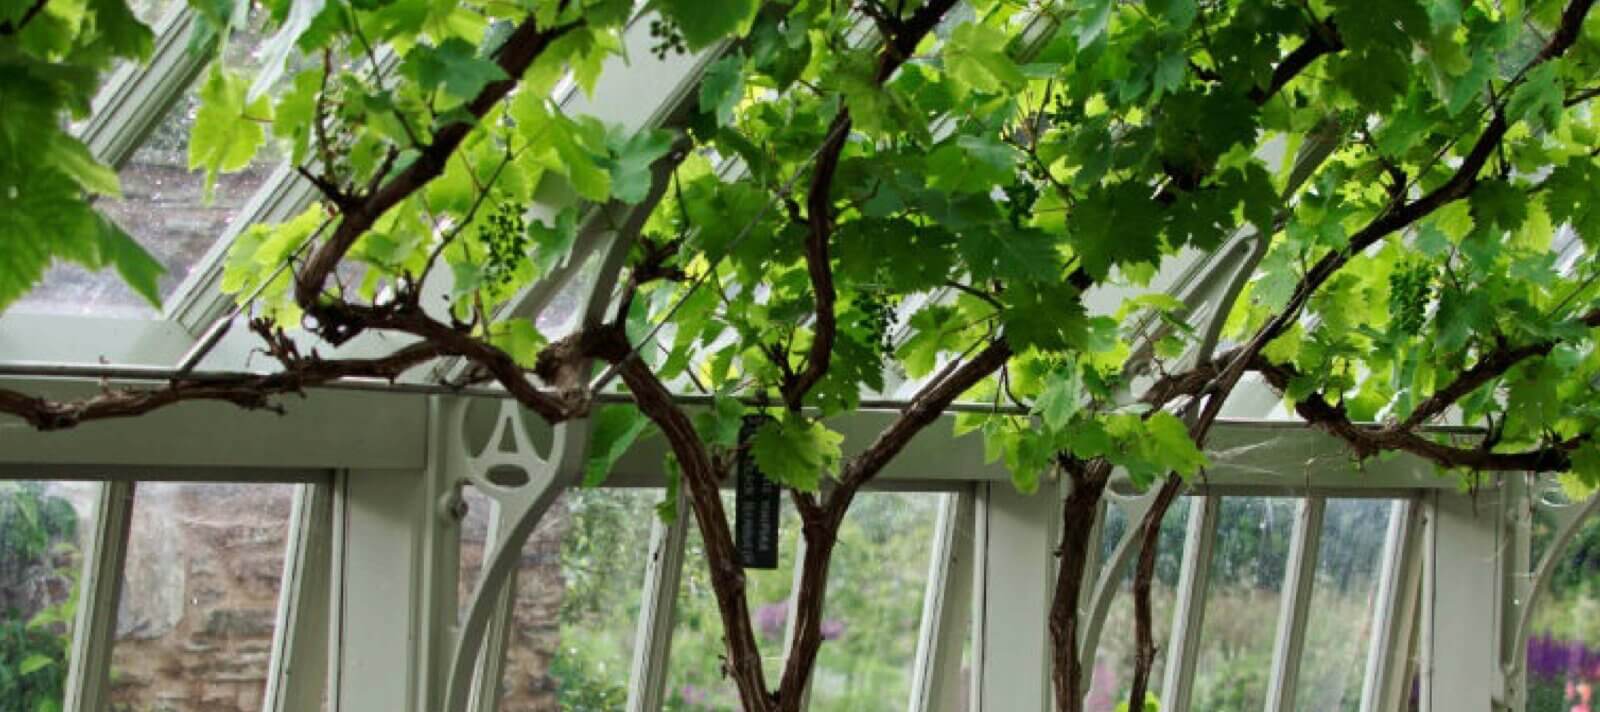 training vines in a greenhouse